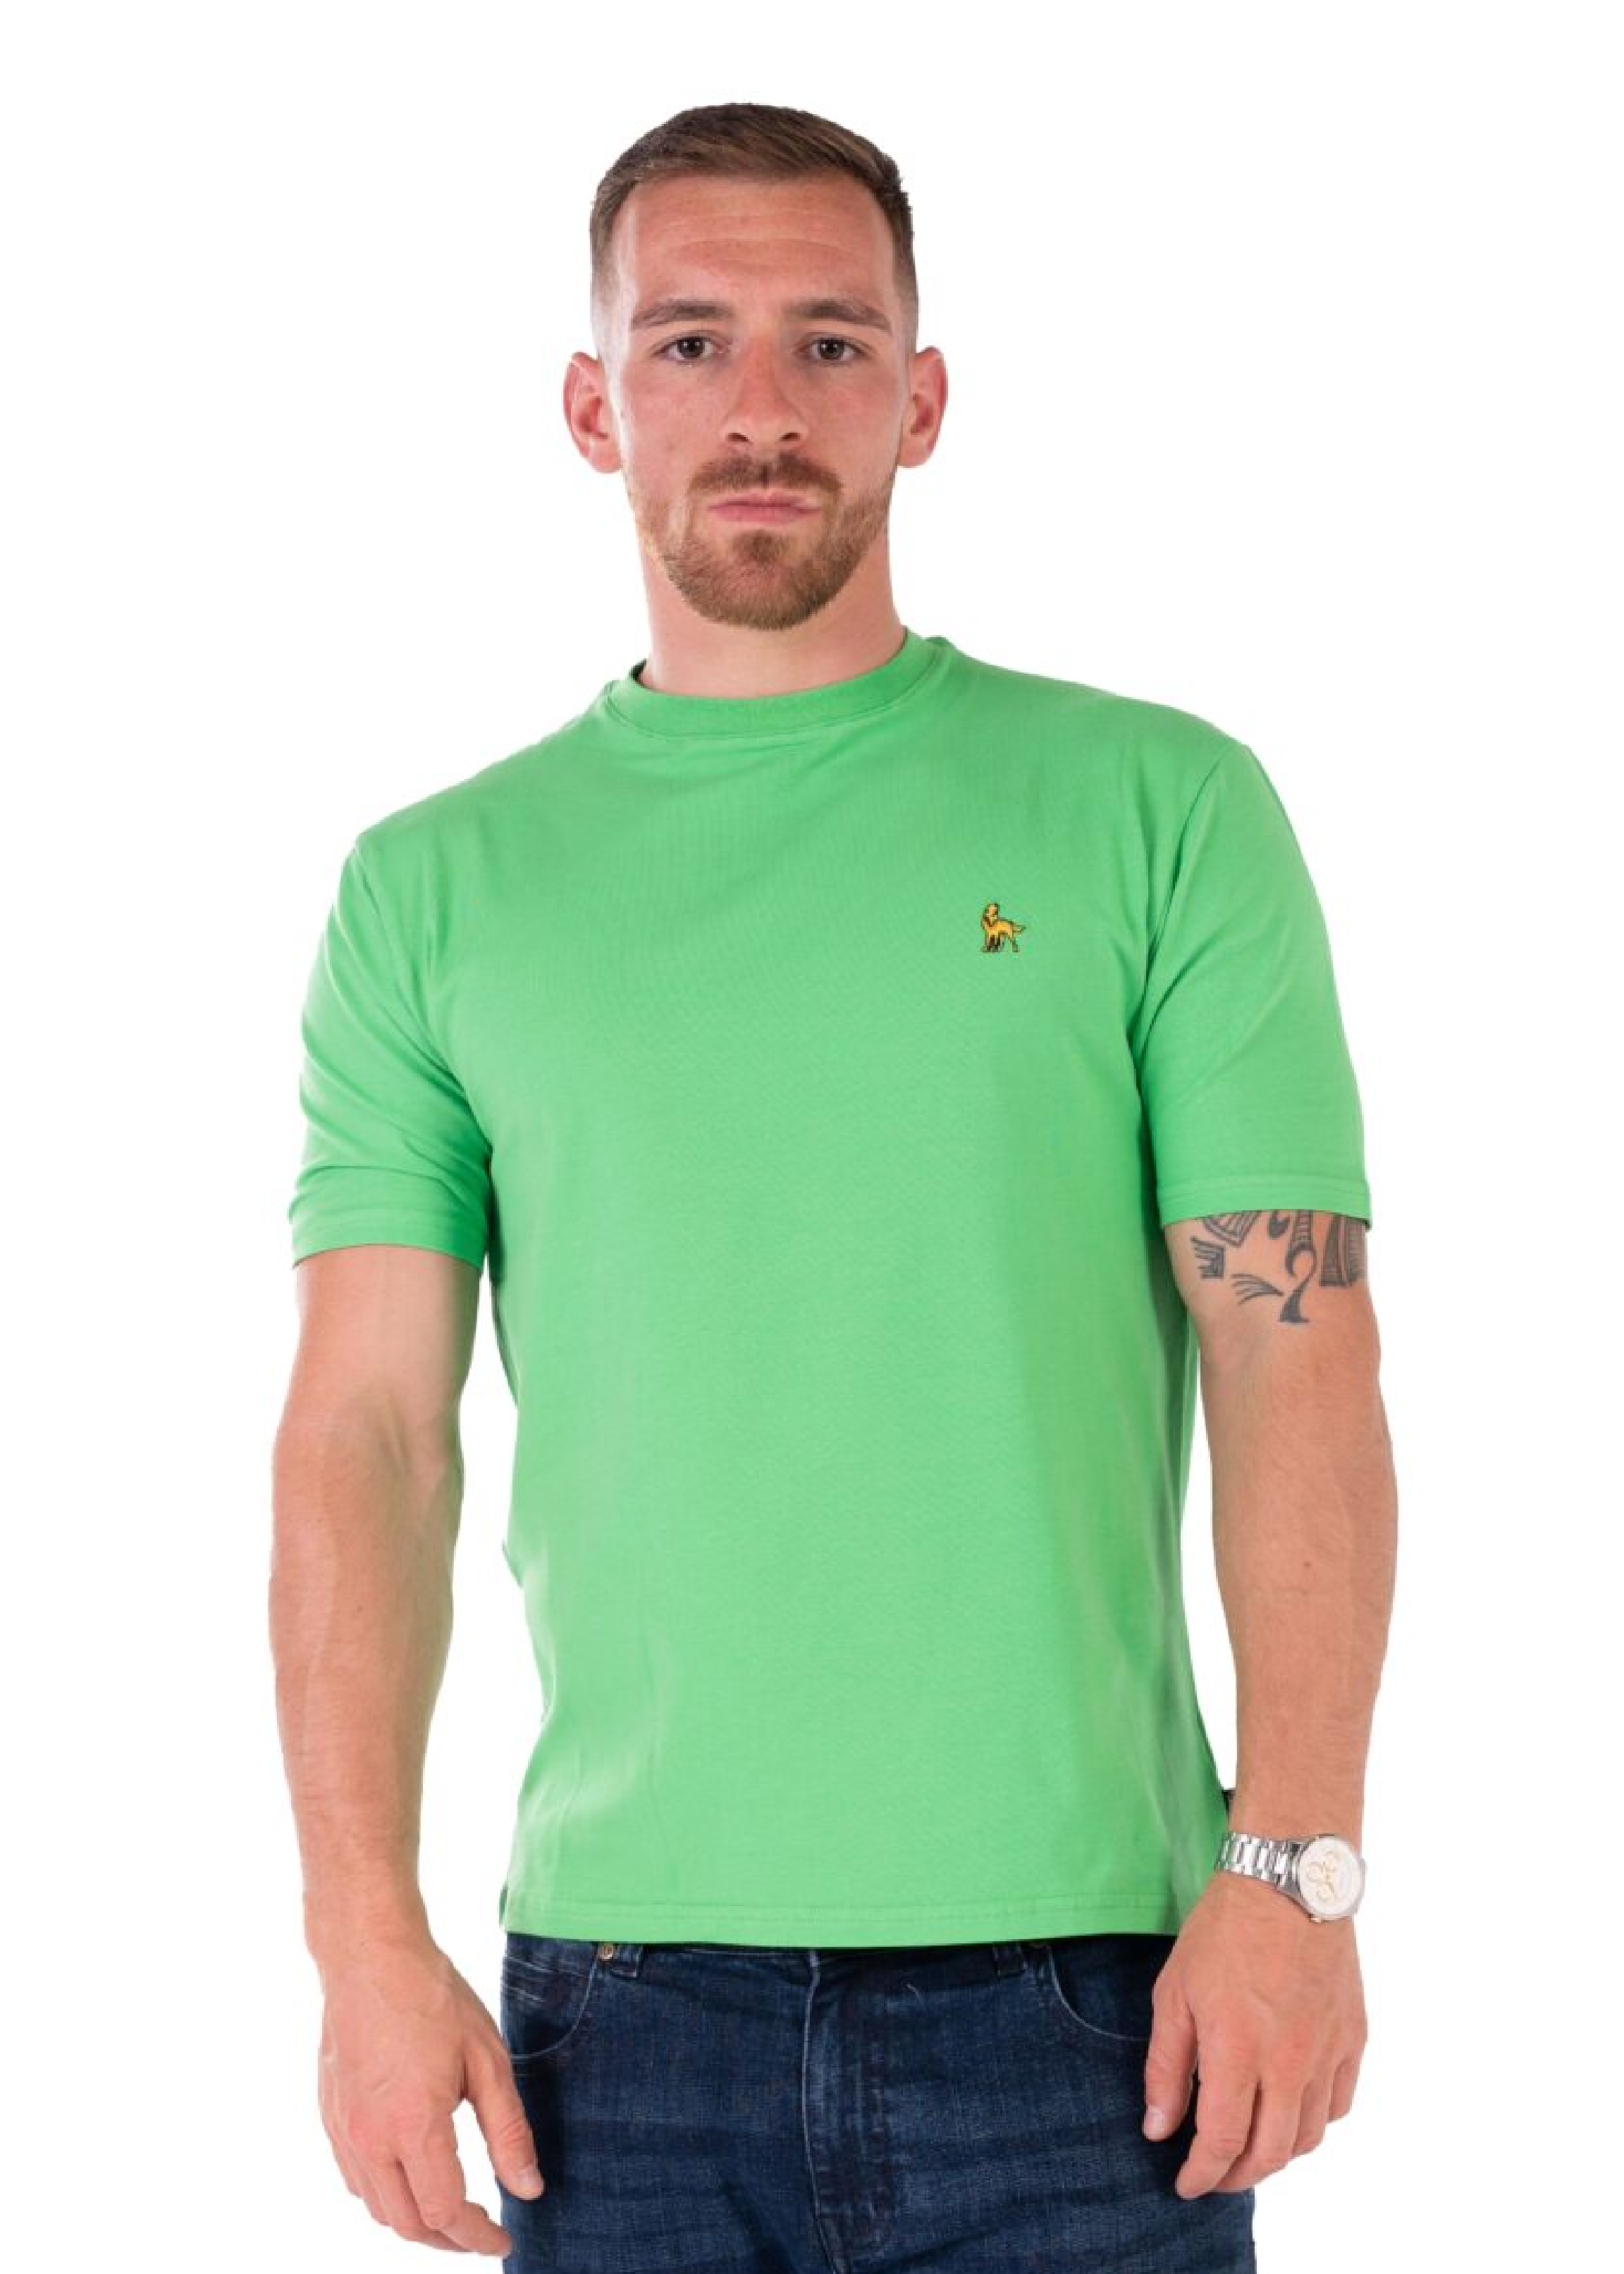 Rous Bright Green Stretch Tee